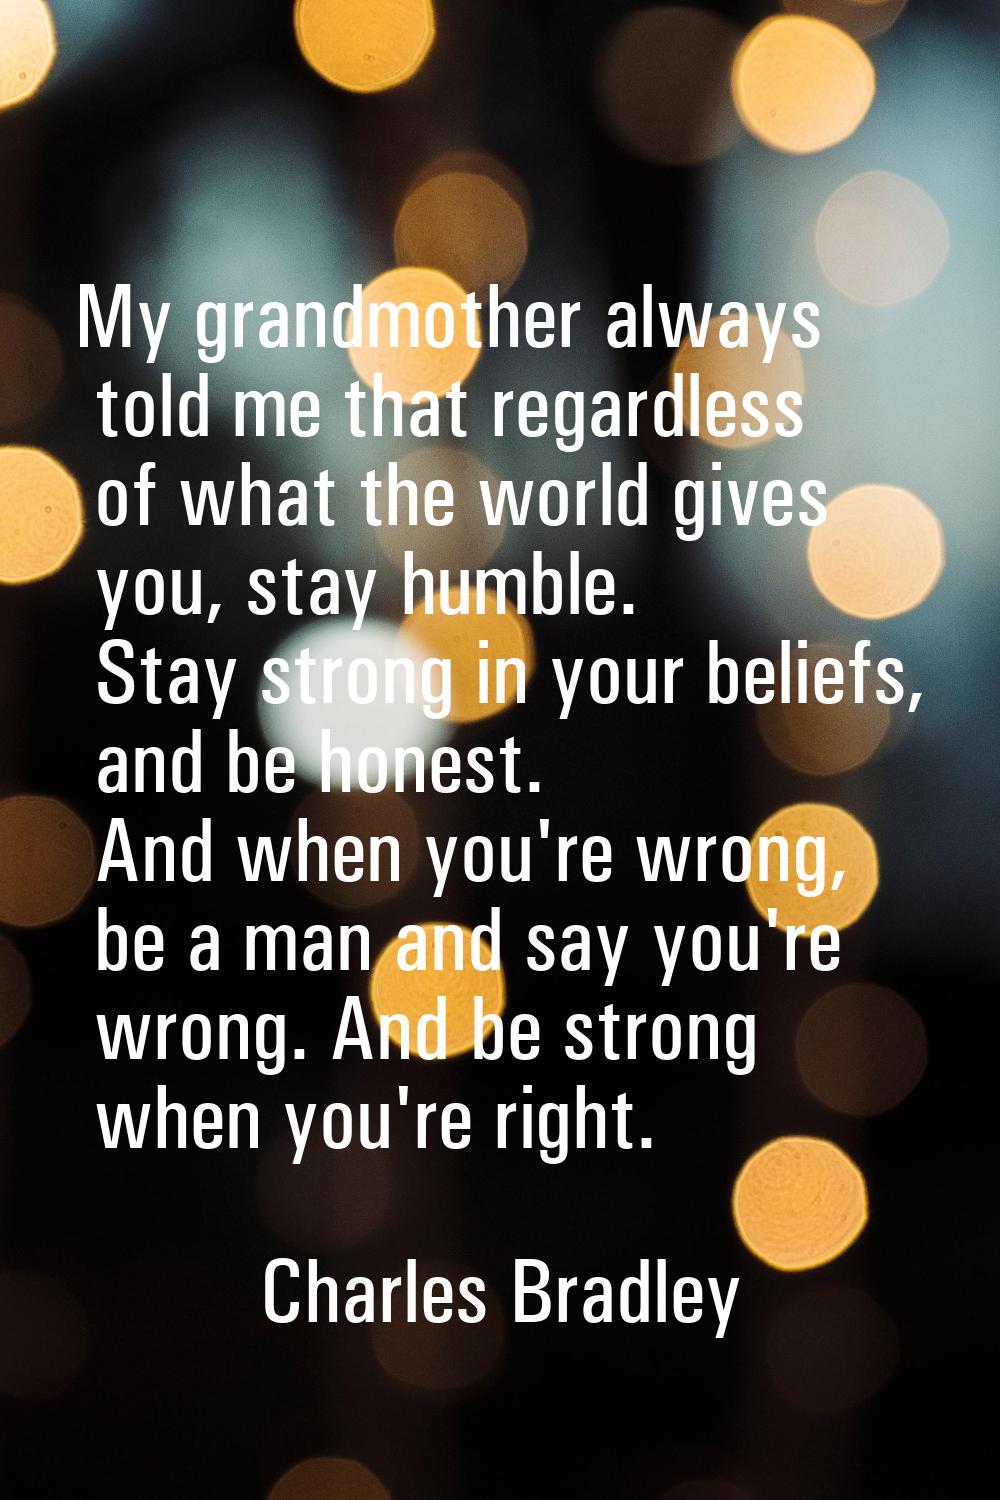 My grandmother always told me that regardless of what the world gives you, stay humble. Stay strong